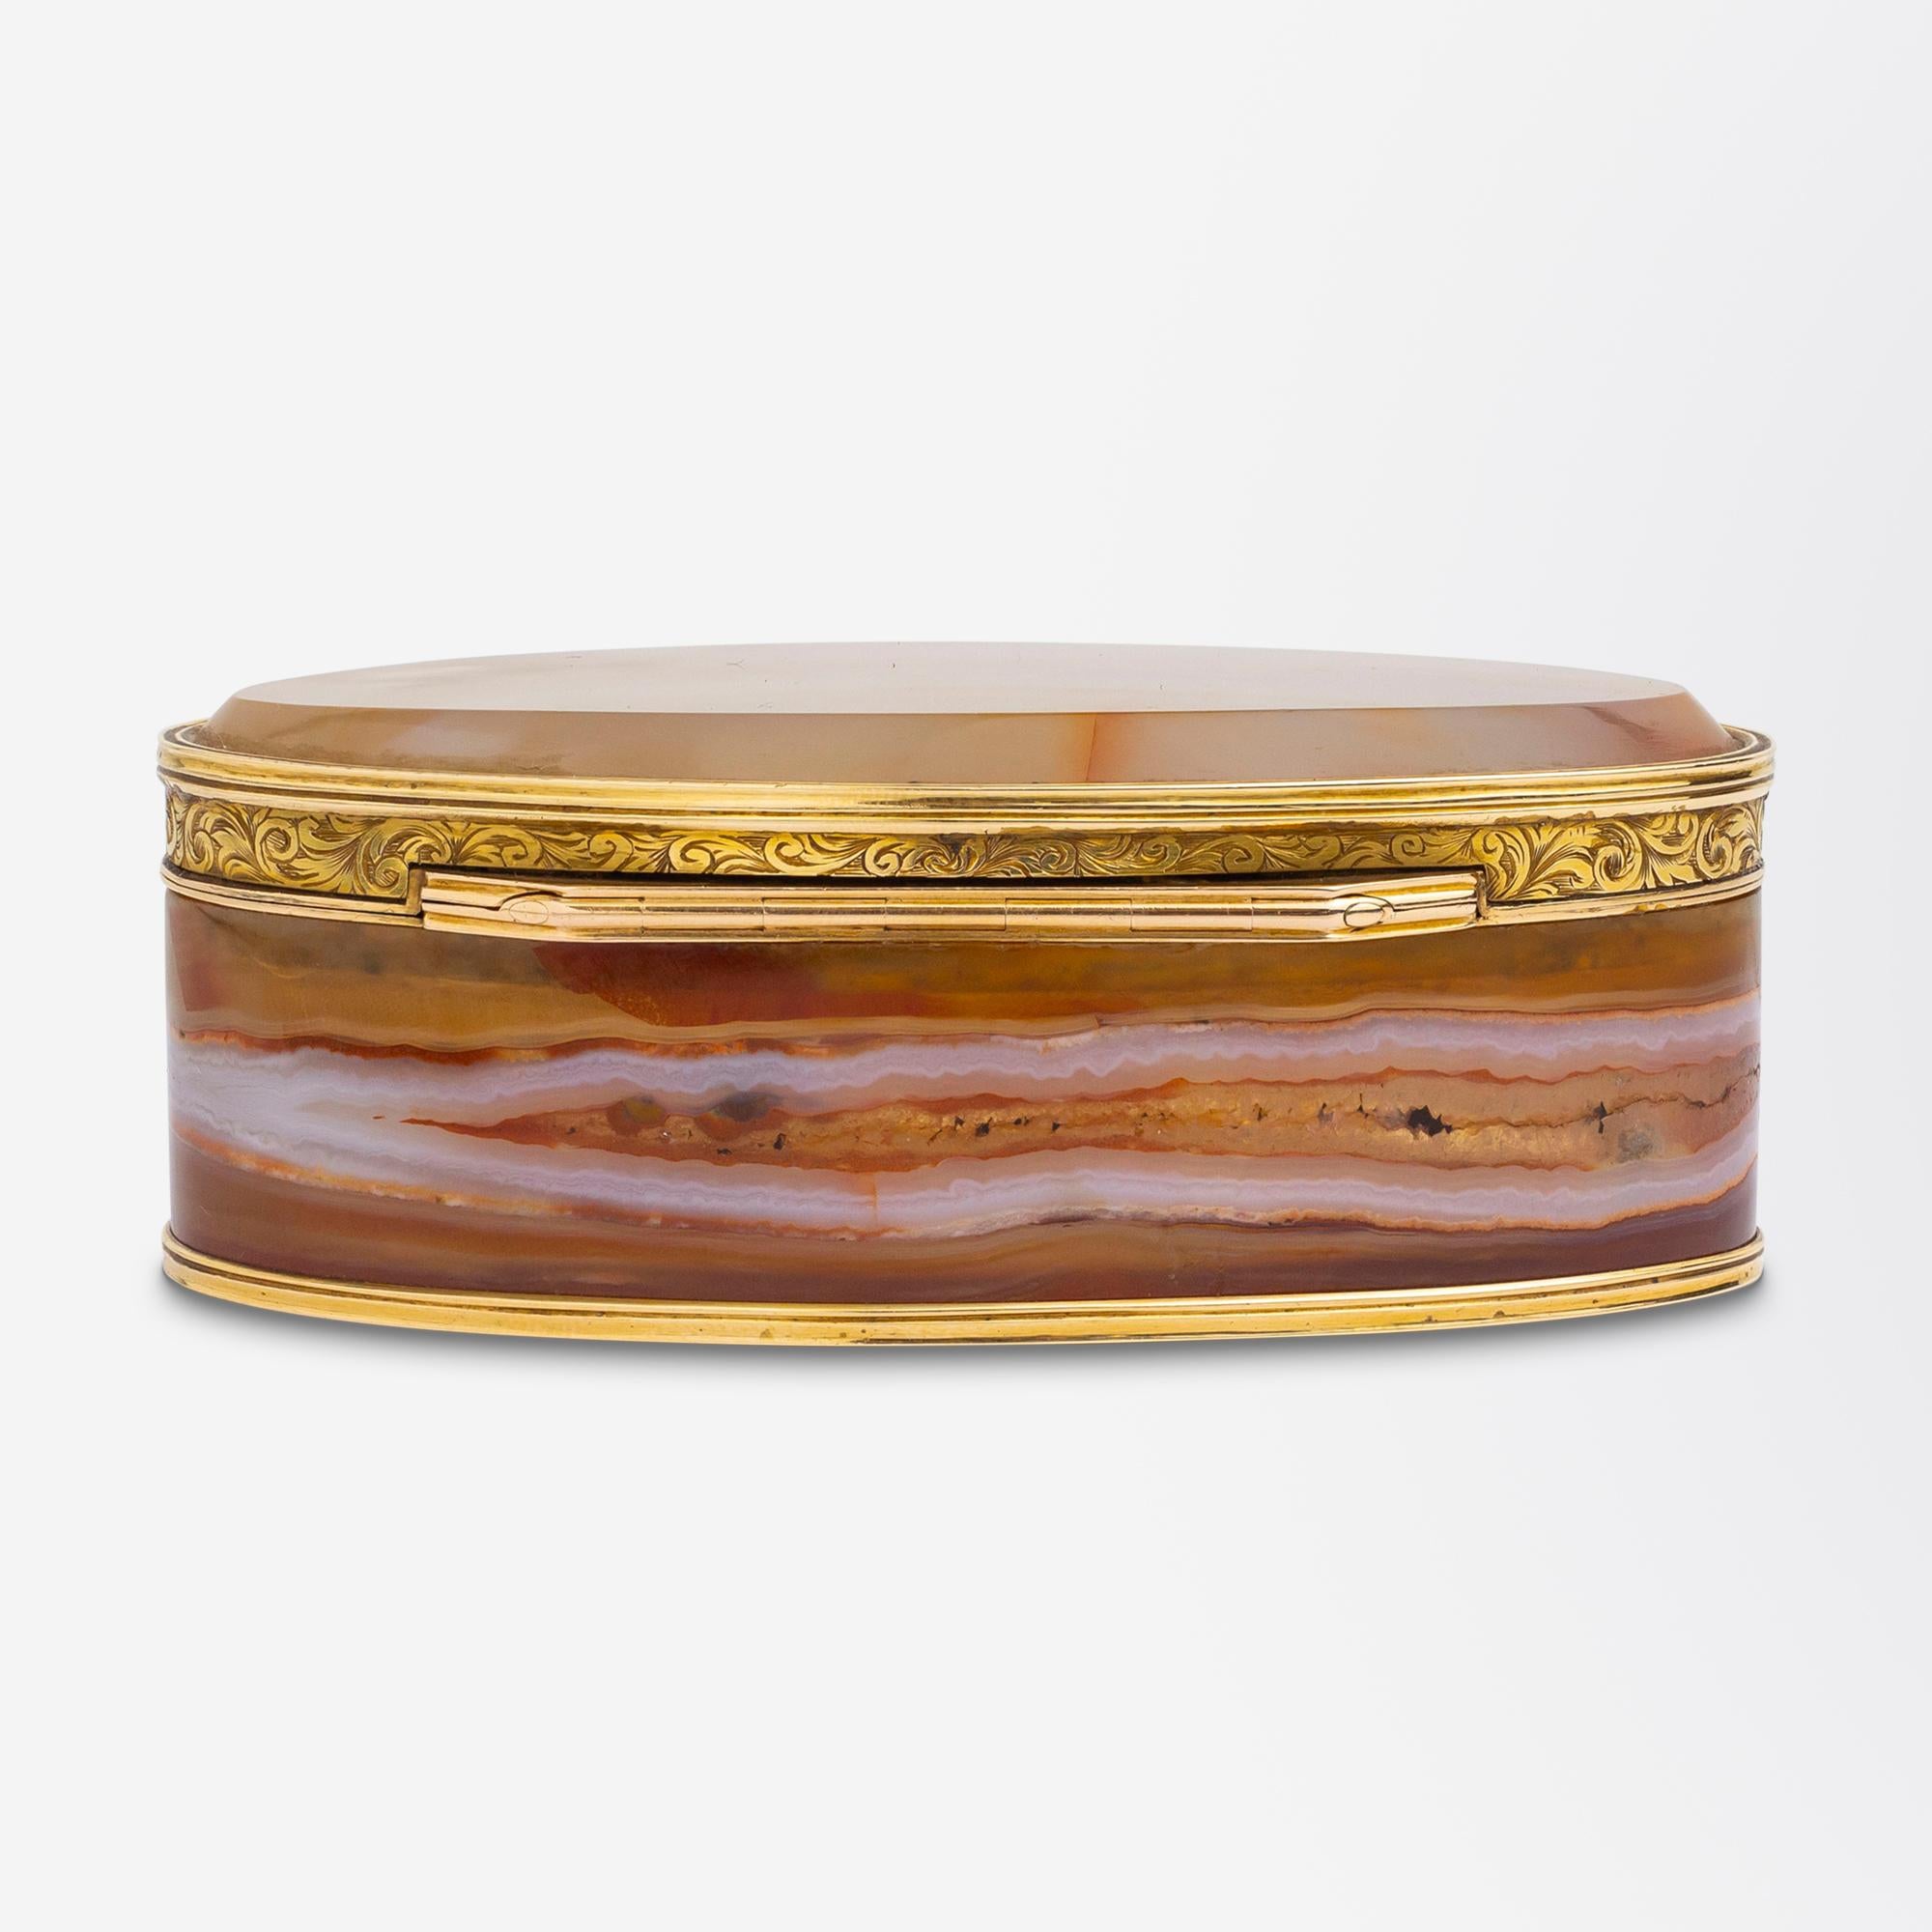 Women's or Men's Oval Carnelian Agate Box With Gold Mounts